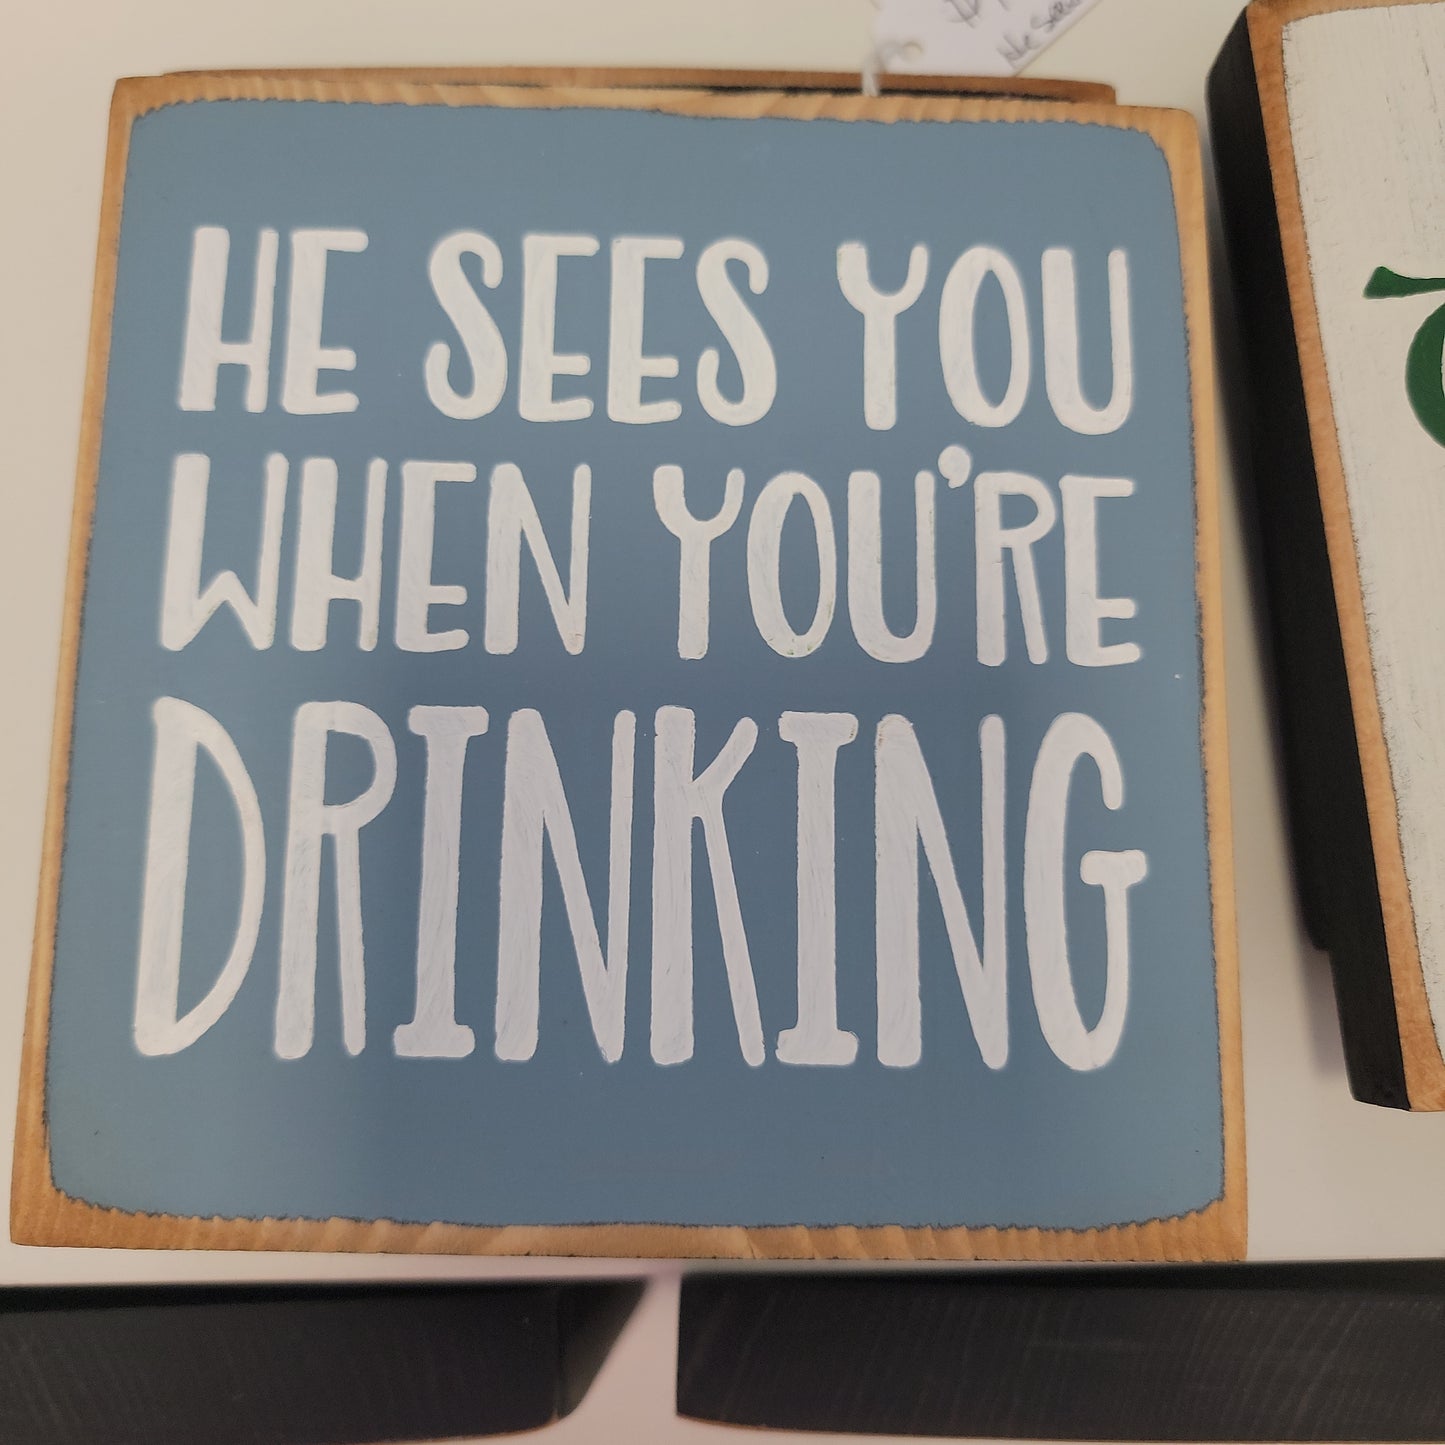 Mini Wood sign He sees you when you're drinking